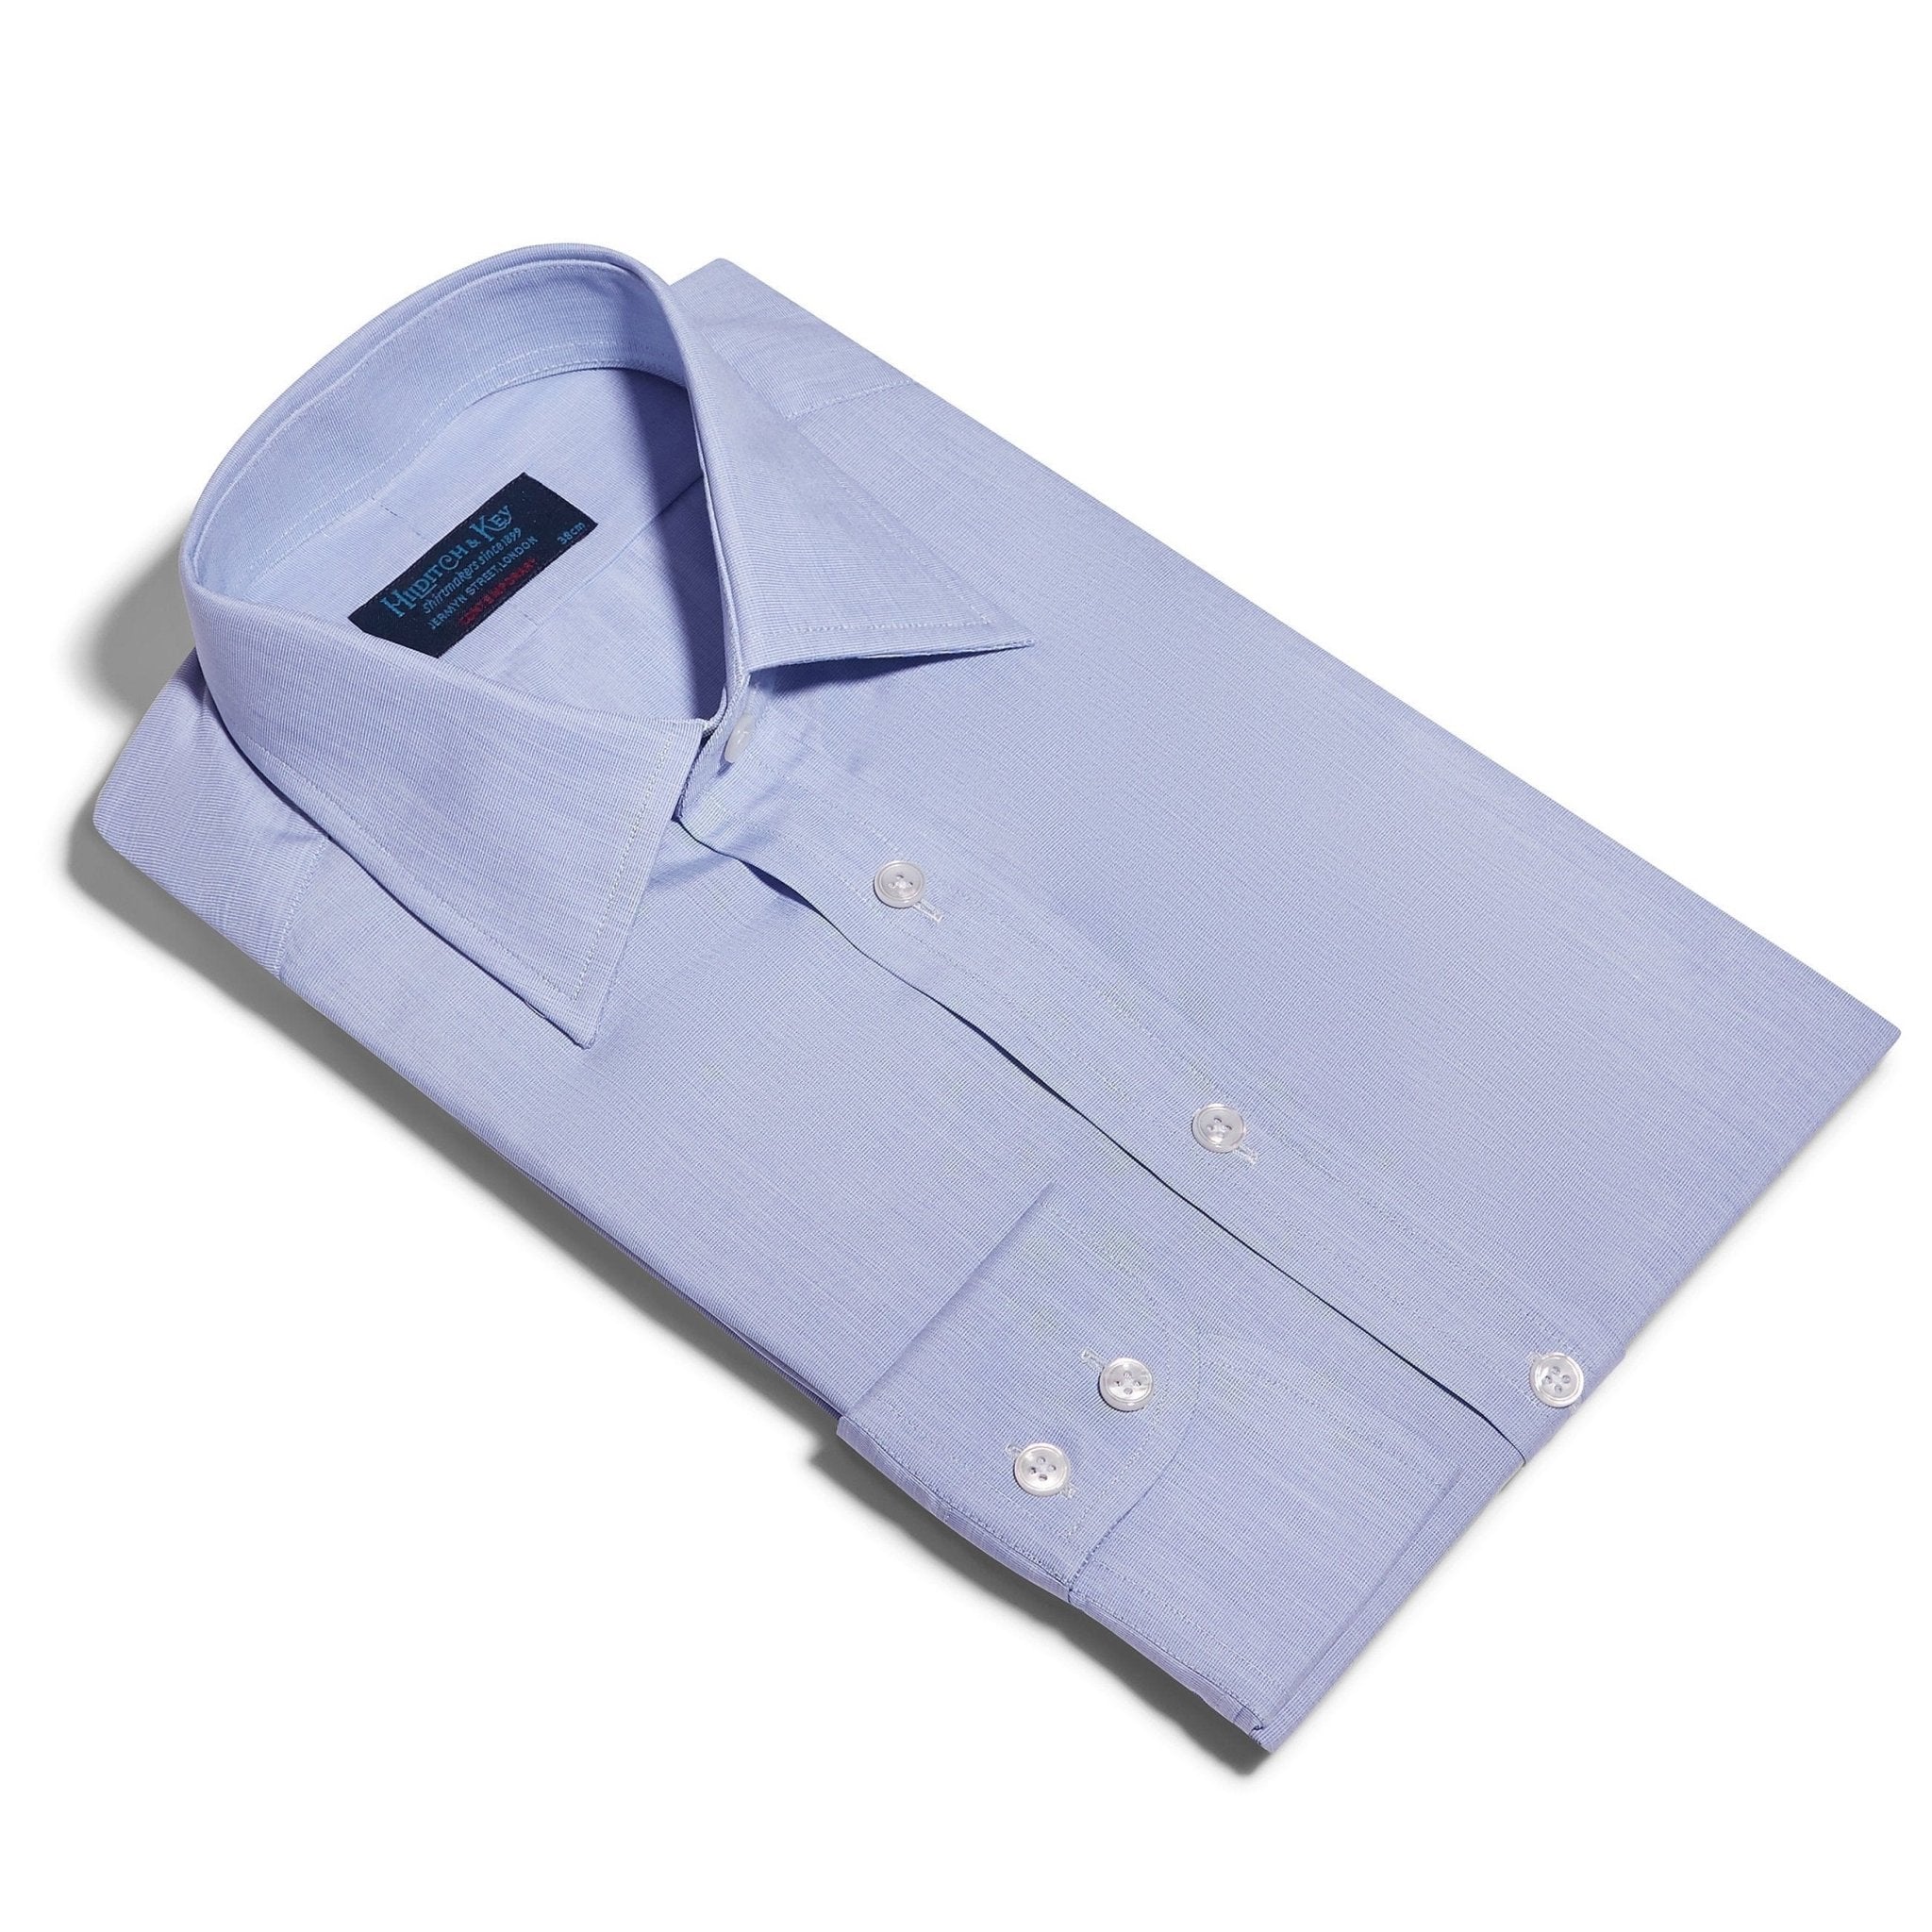 Contemporary Fit, Classic Collar, 2 Button Cuff Shirt in a Plain Blue End-On-End Cotton - Hilditch & Key